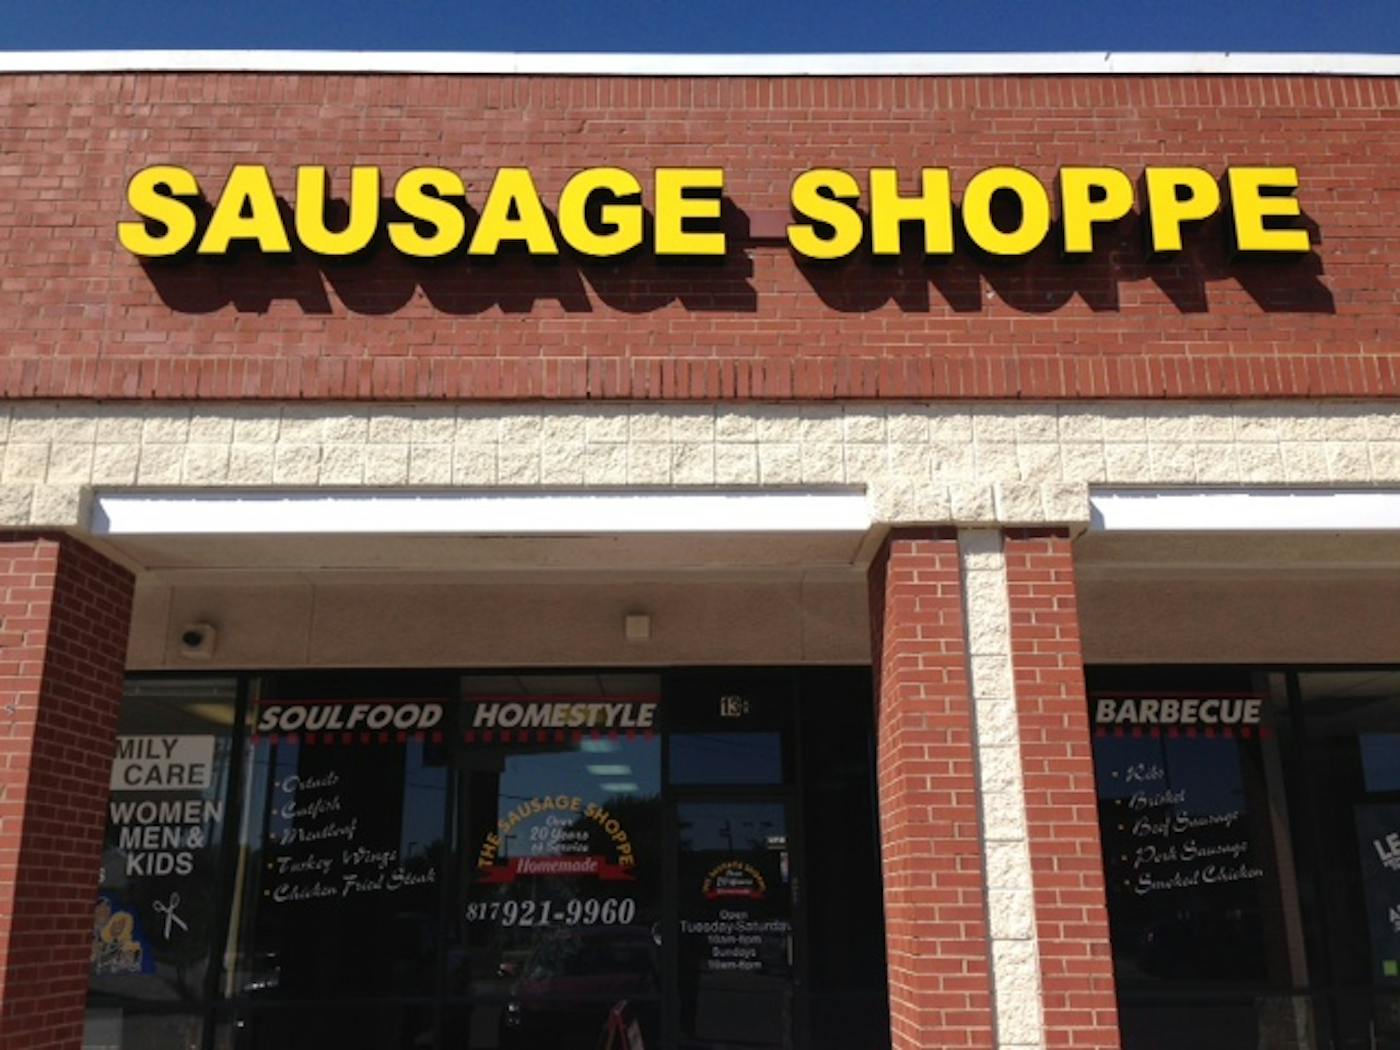 The Sausage Shoppe – Texas Monthly